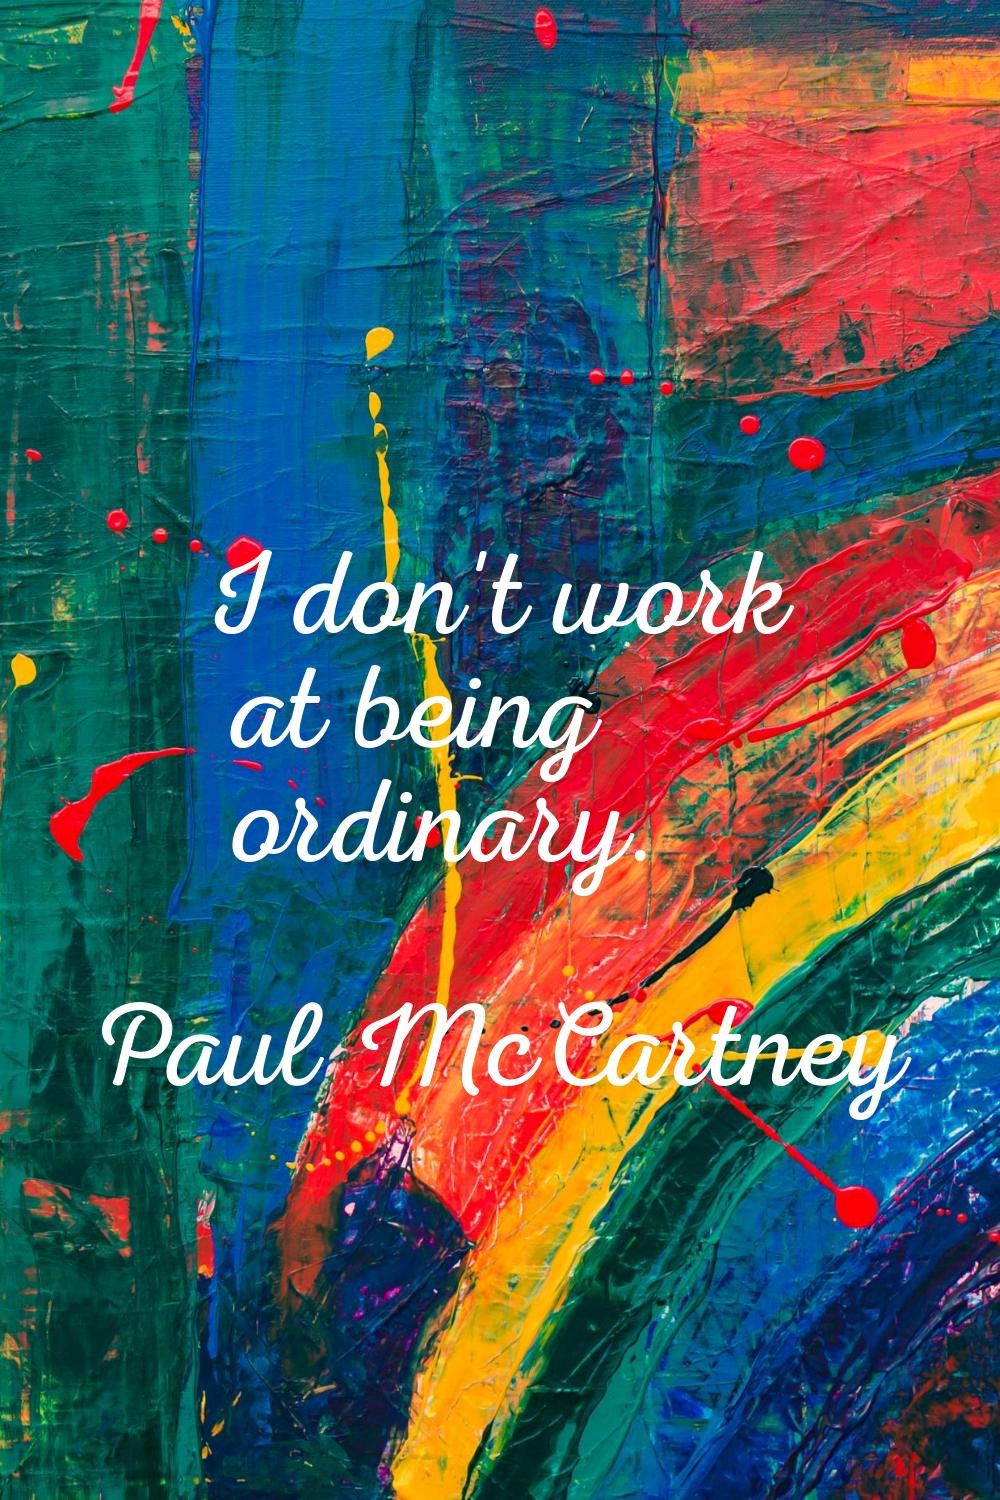 I don't work at being ordinary.